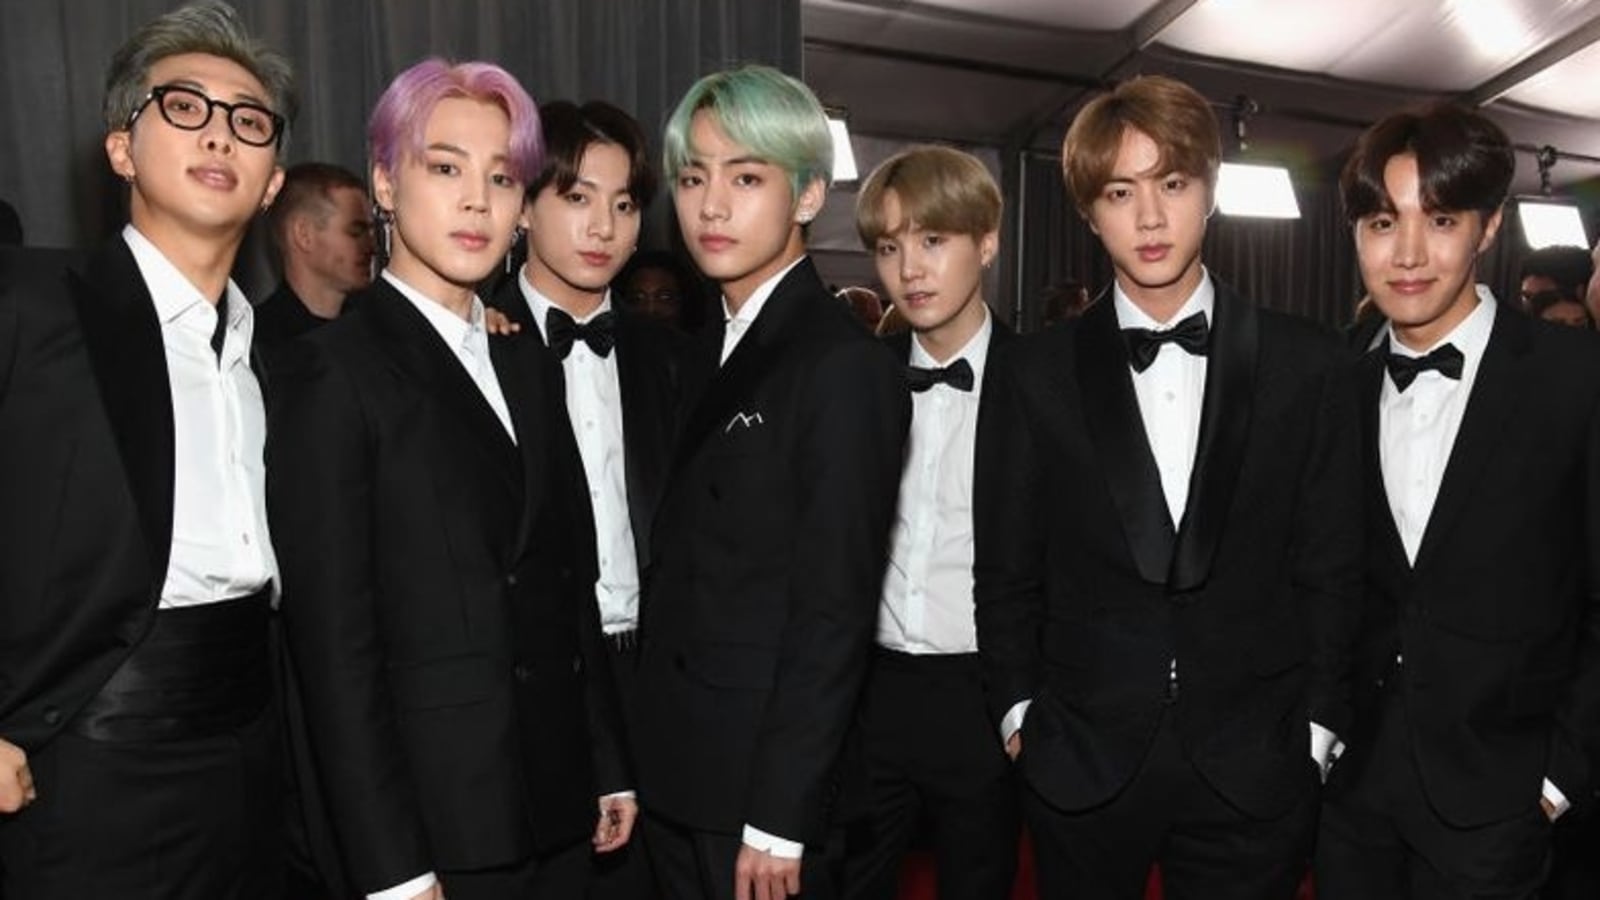 Will BTS make history with its first win at 65th Grammy Awards?